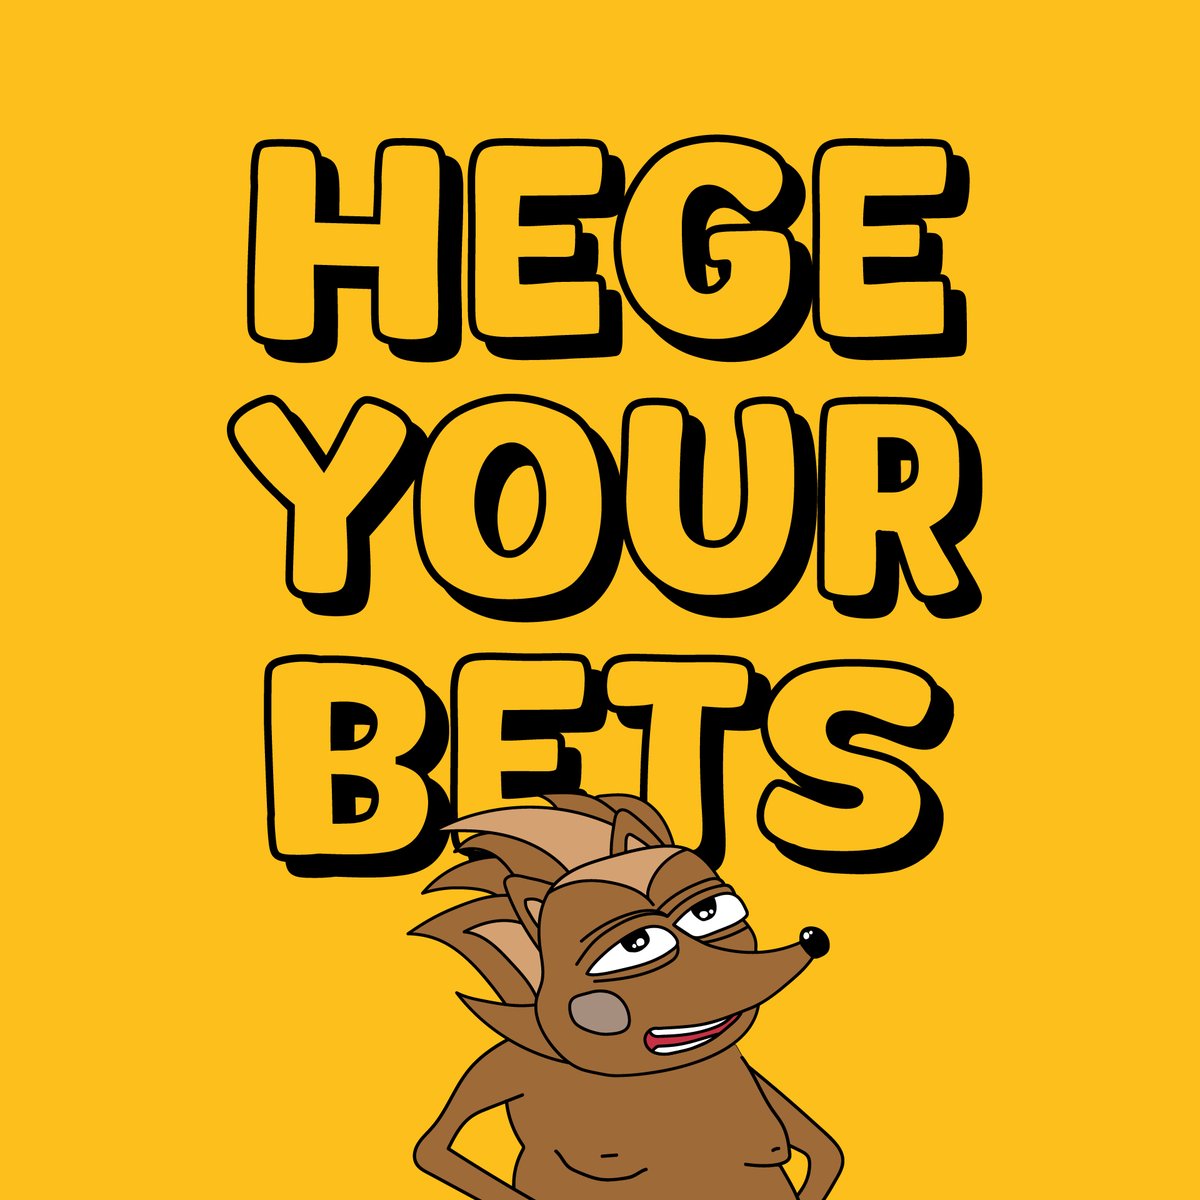 Reason #4: Hege is a Perfect Name

Hege is short, it's memorable, and most of all, it pokes fun at TradFi in a way that I really love.

If #memecoins are an expression of 'financial nihilism', then what better coin to lead the charge than one called 'hege'?

It would be…